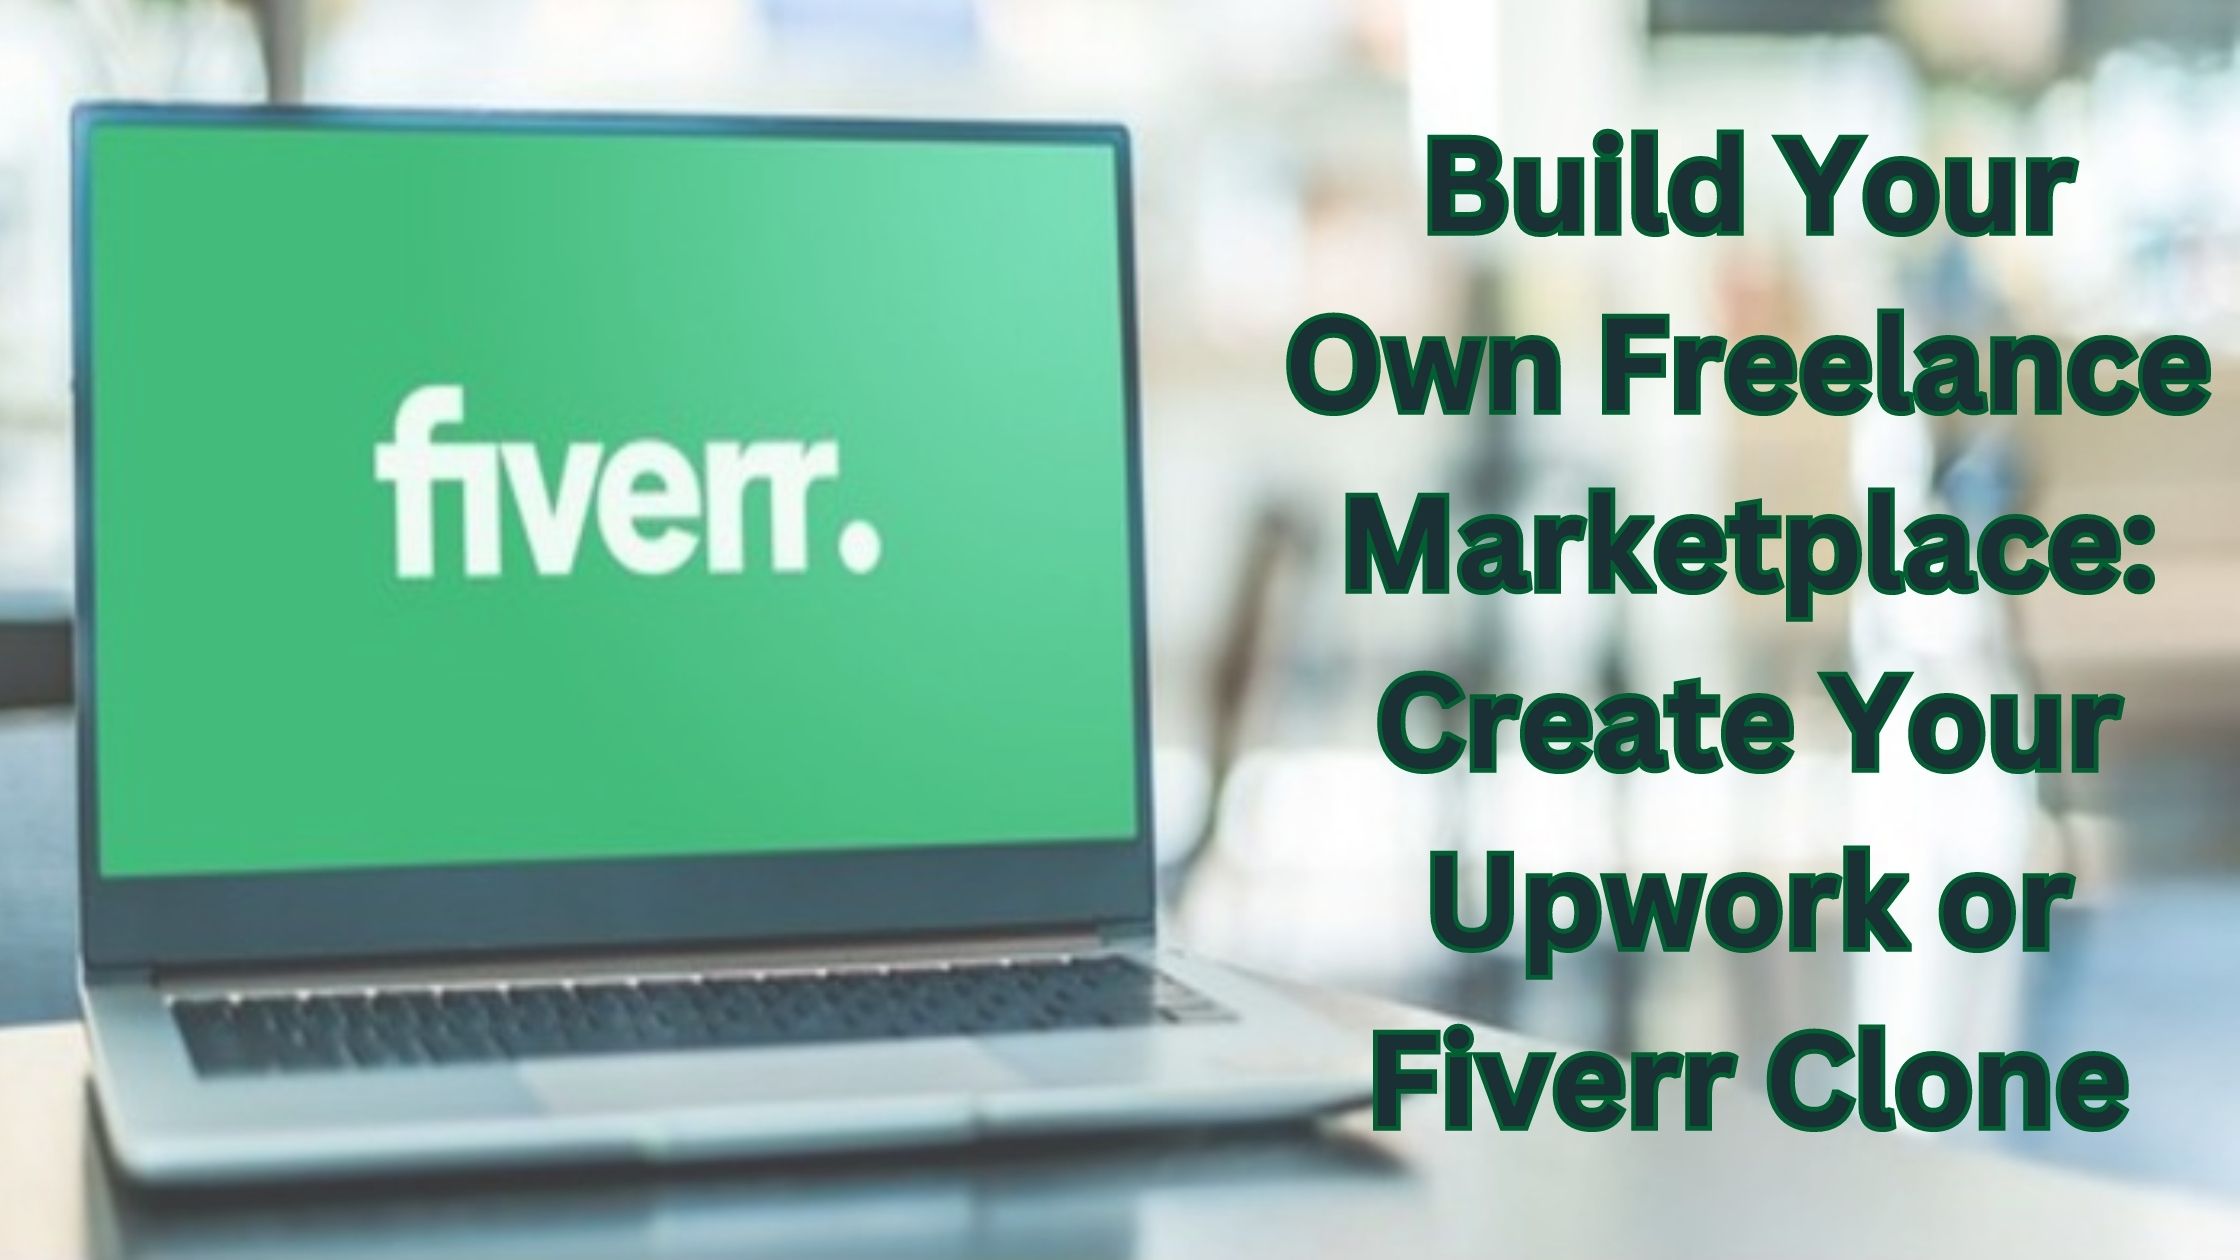 Build Your Own Freelance Marketplace: Create Your Upwork or Fiverr Clone